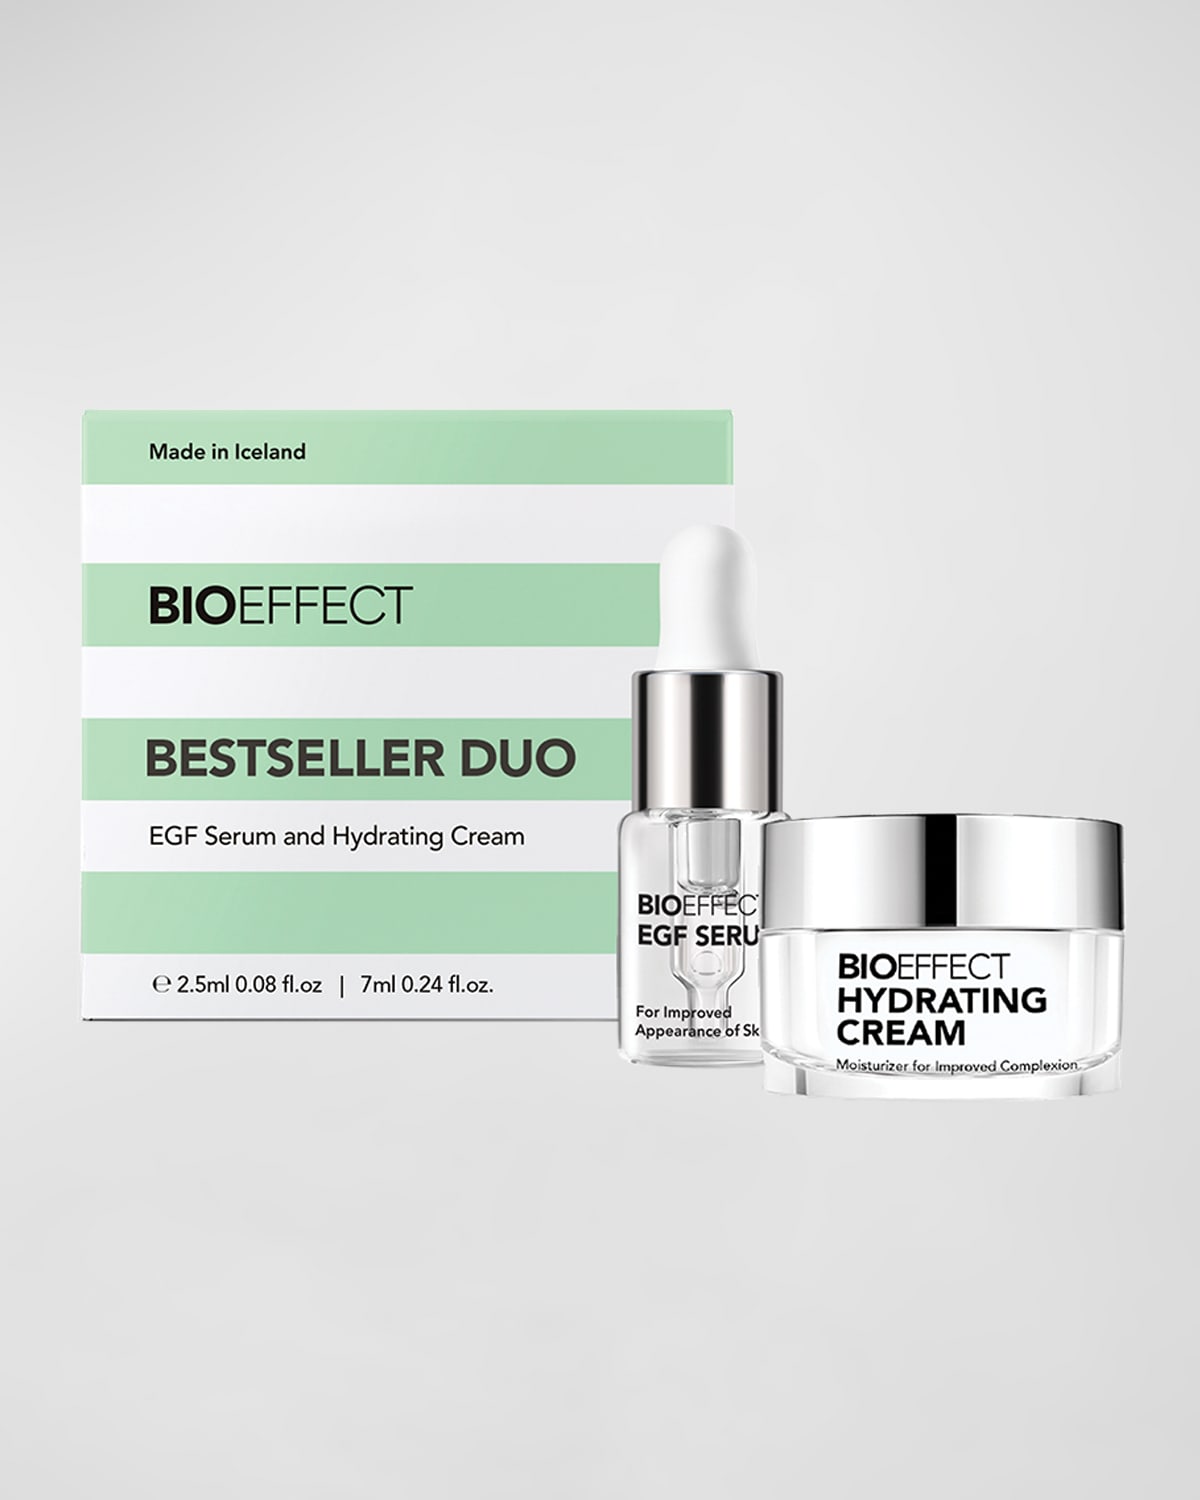 BIOEFFECT Best-Sellers Duo, Yours with any $150 BIOEFFECT Purchase